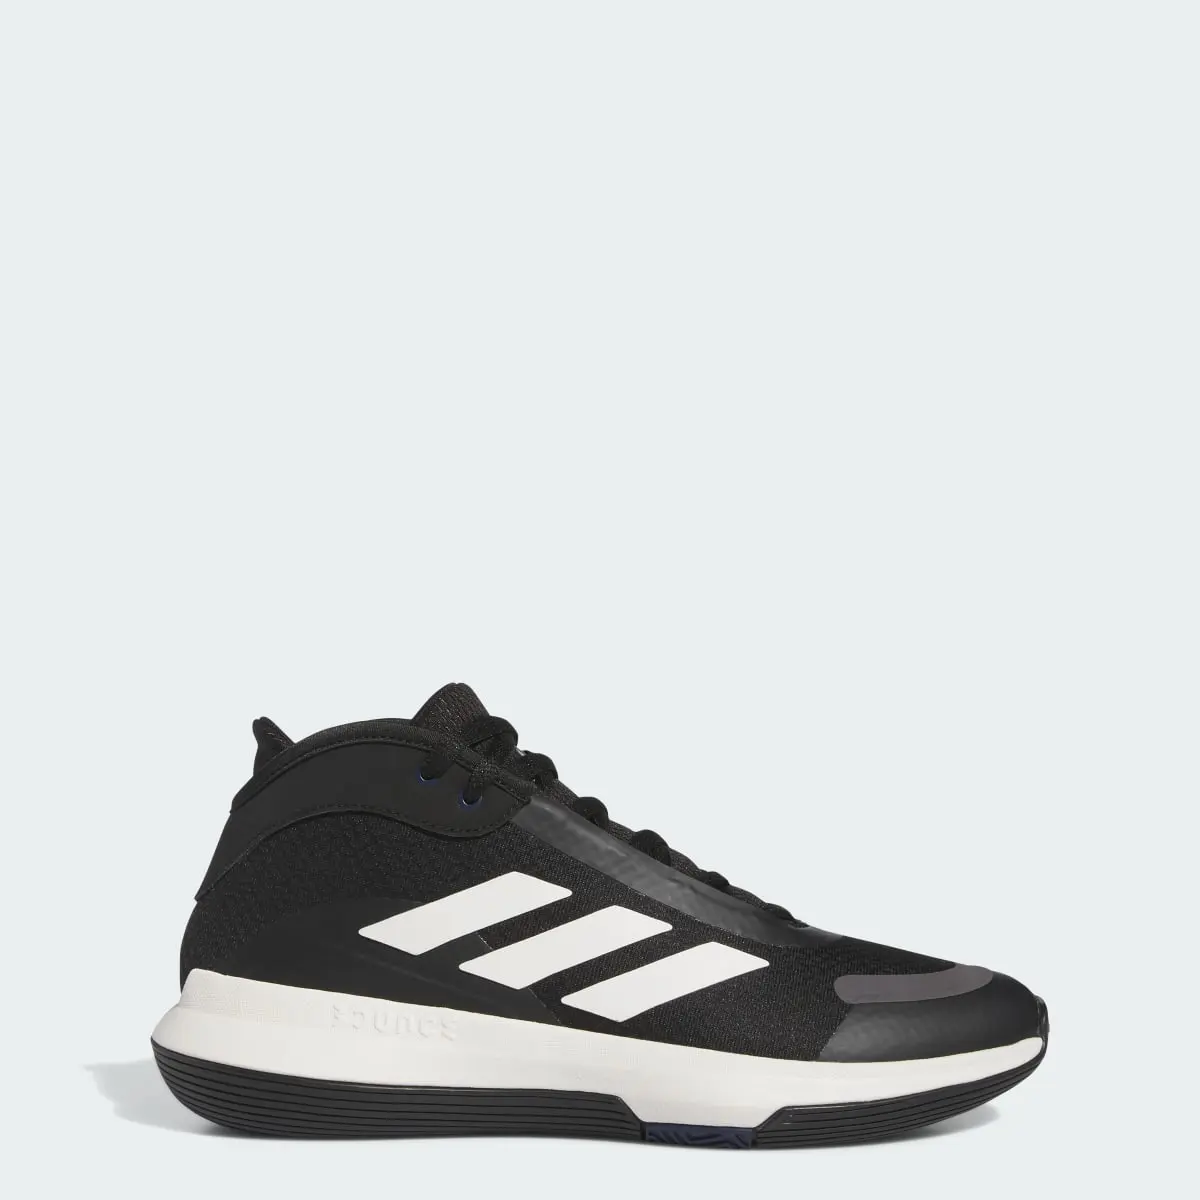 Adidas Bounce Legends Low Basketball Shoes. 1